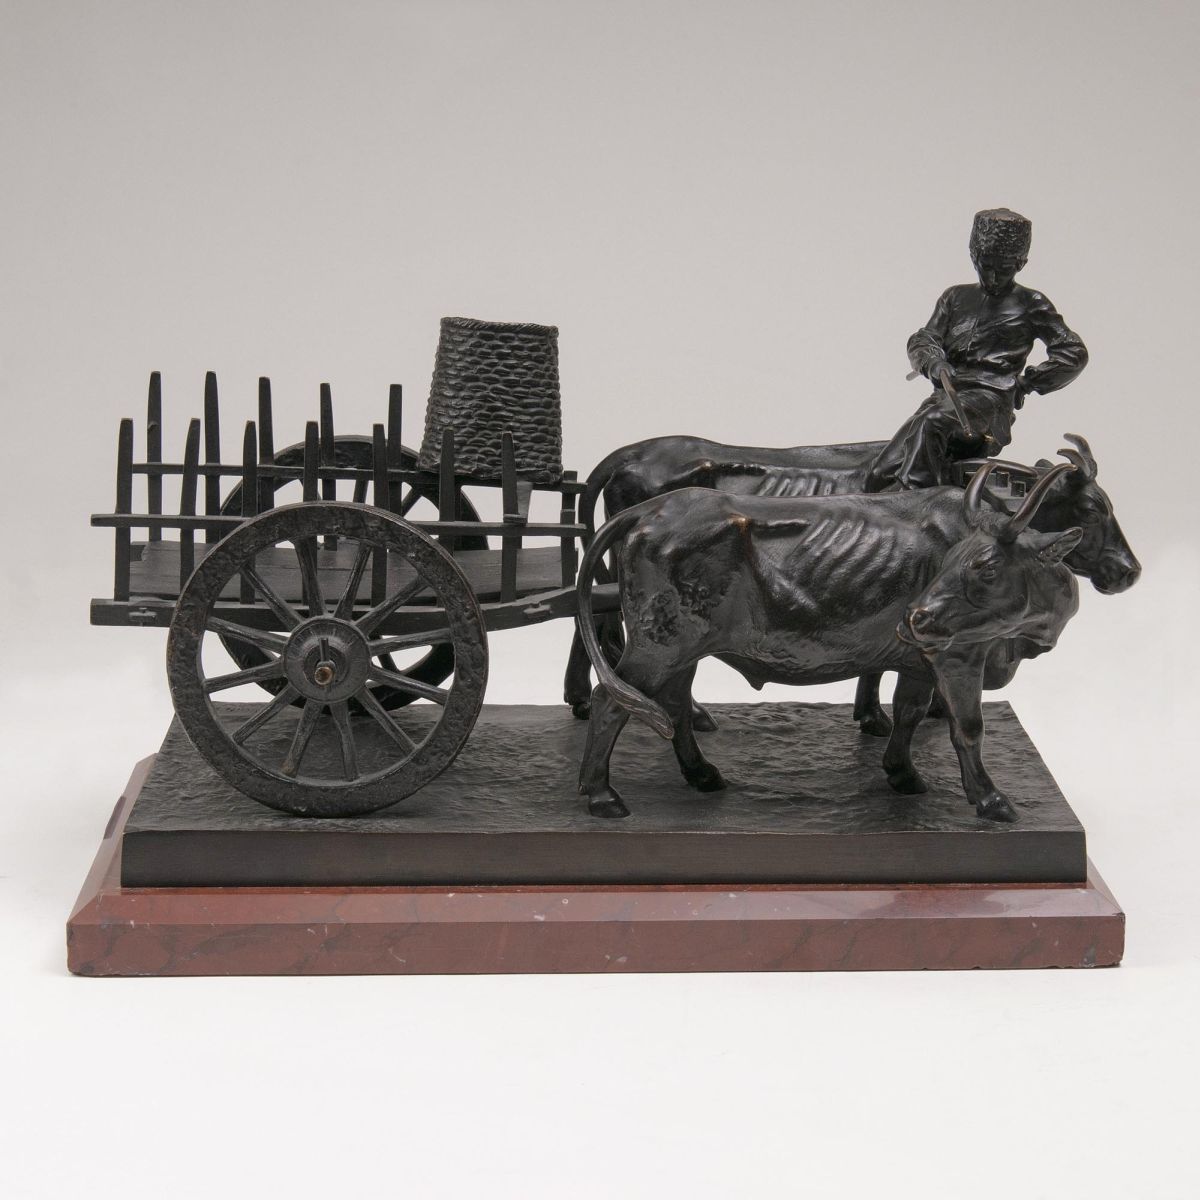 A Bronze Group of an Oxen Cart in the Caucasus - image 2